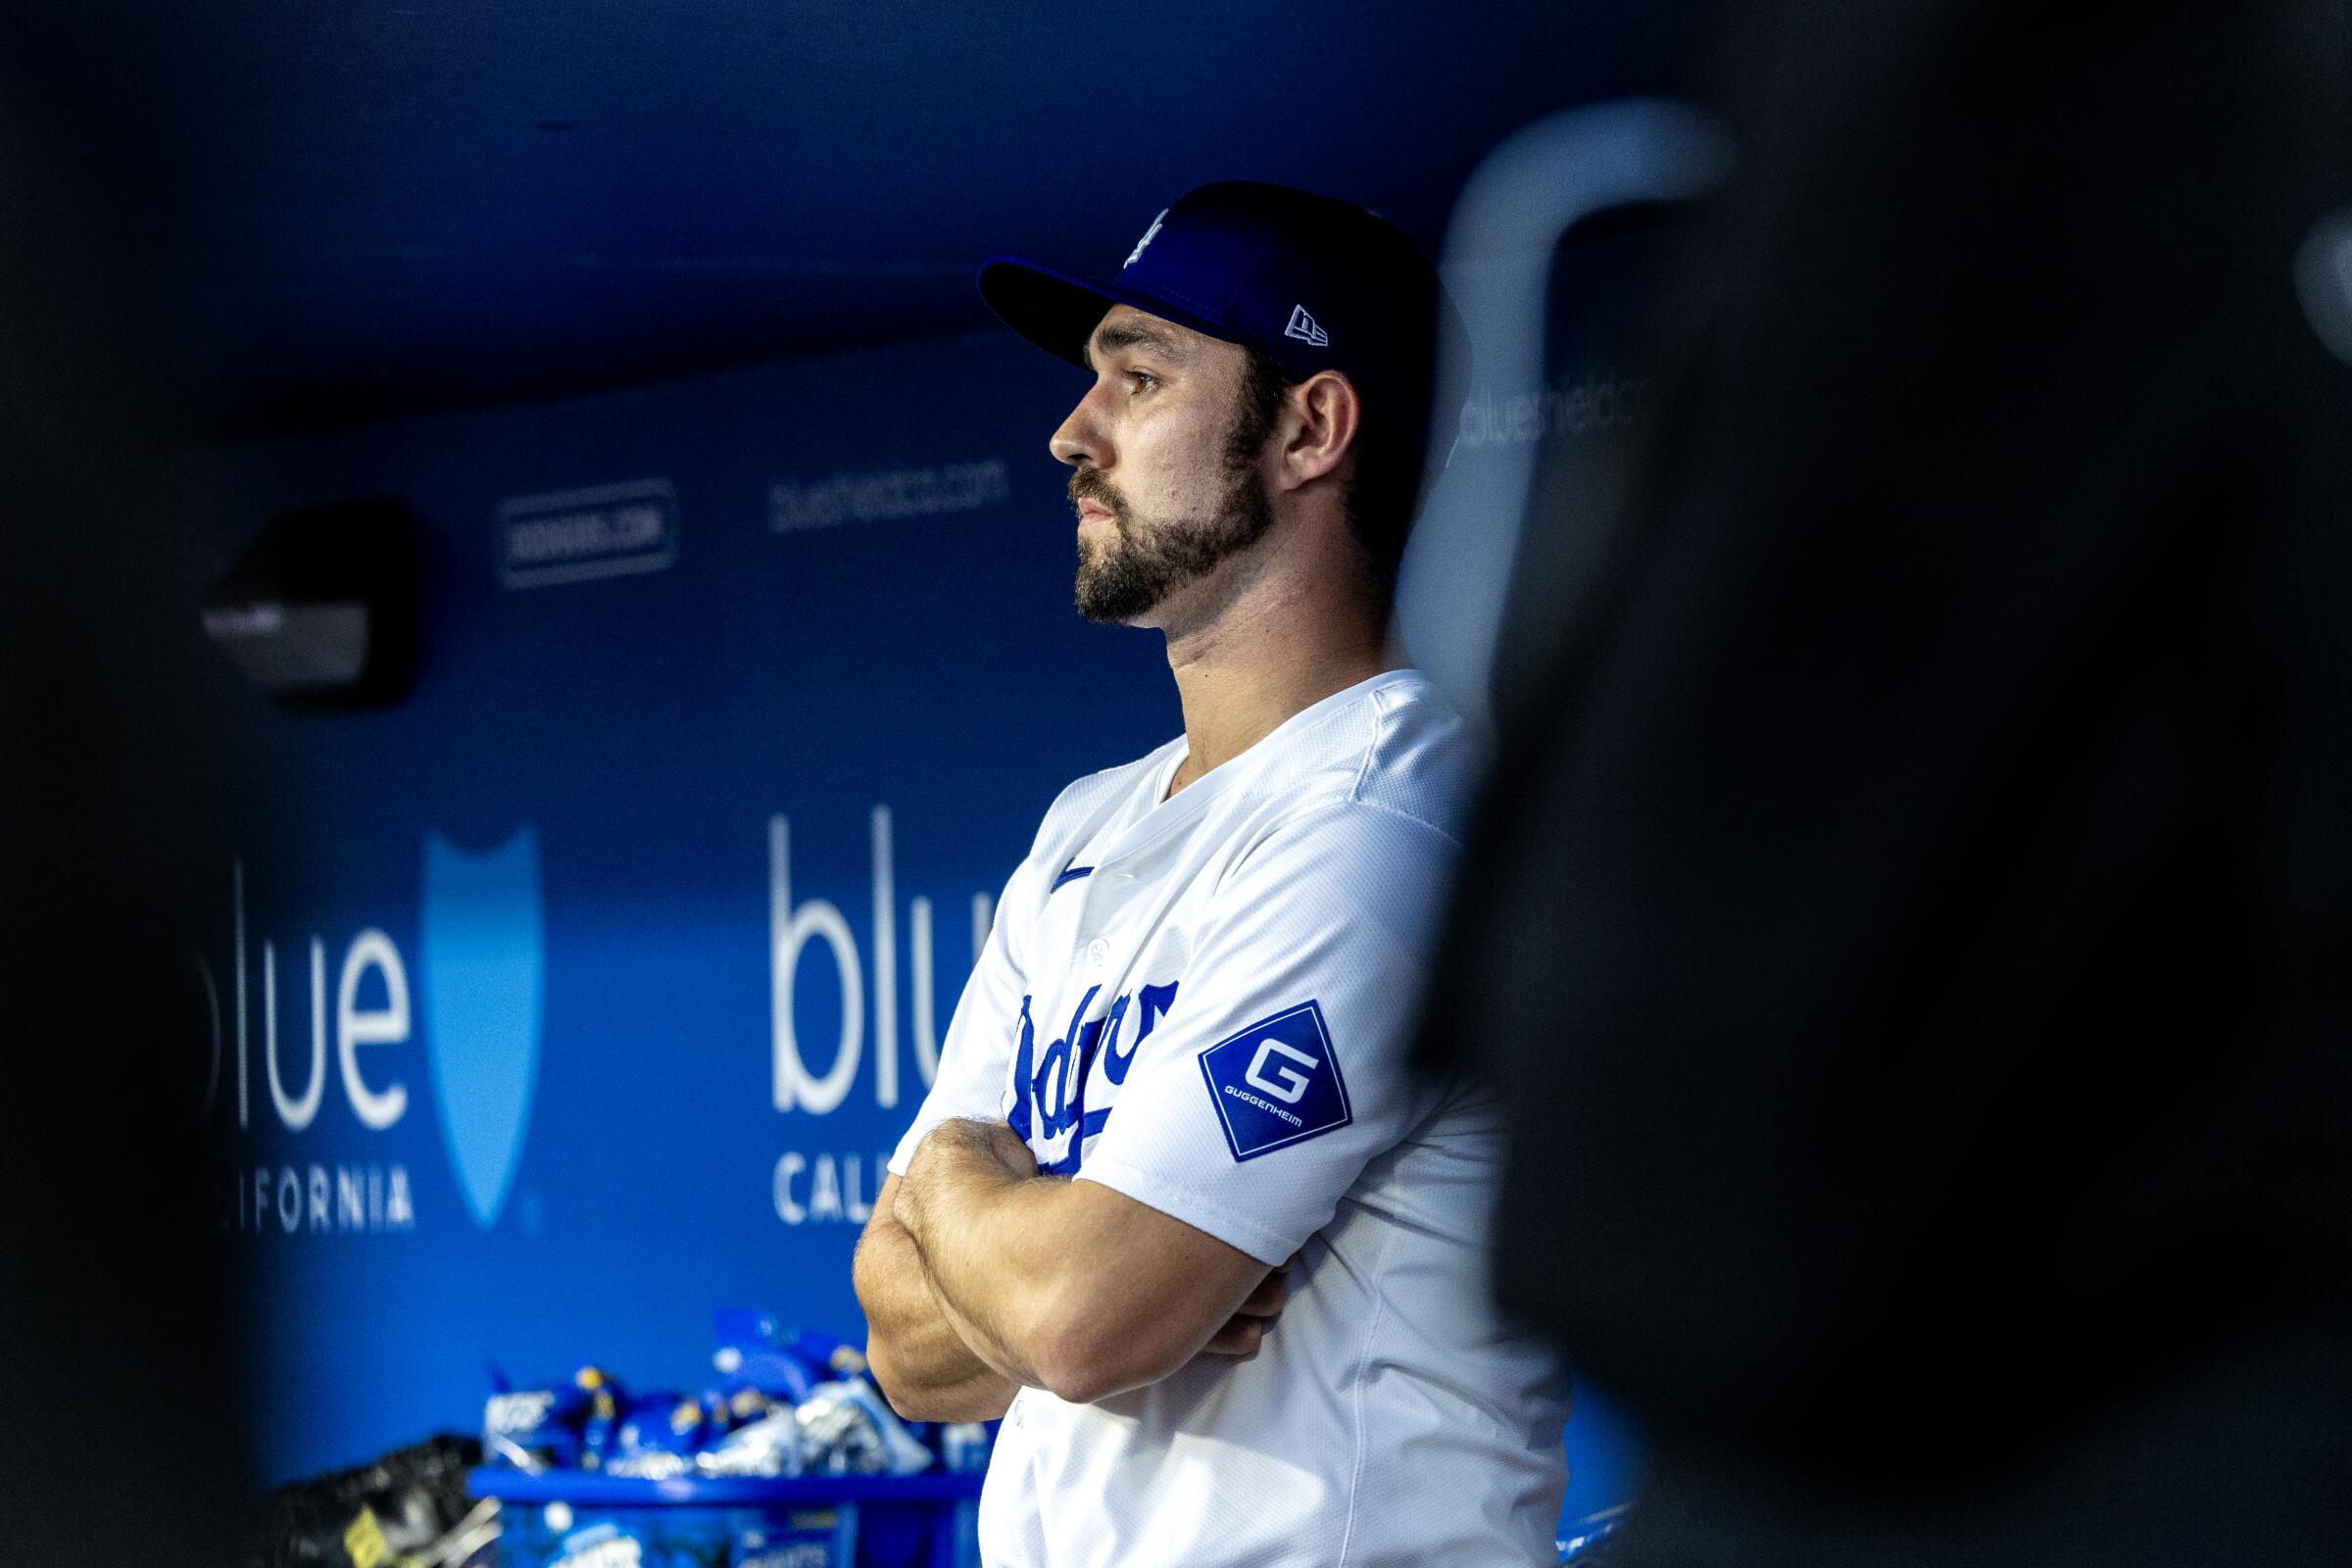 Dodgers reliever J.P. Feyereisen stares out of the dugout after giving up a three-run double to San Diego's Jurickson Profar.